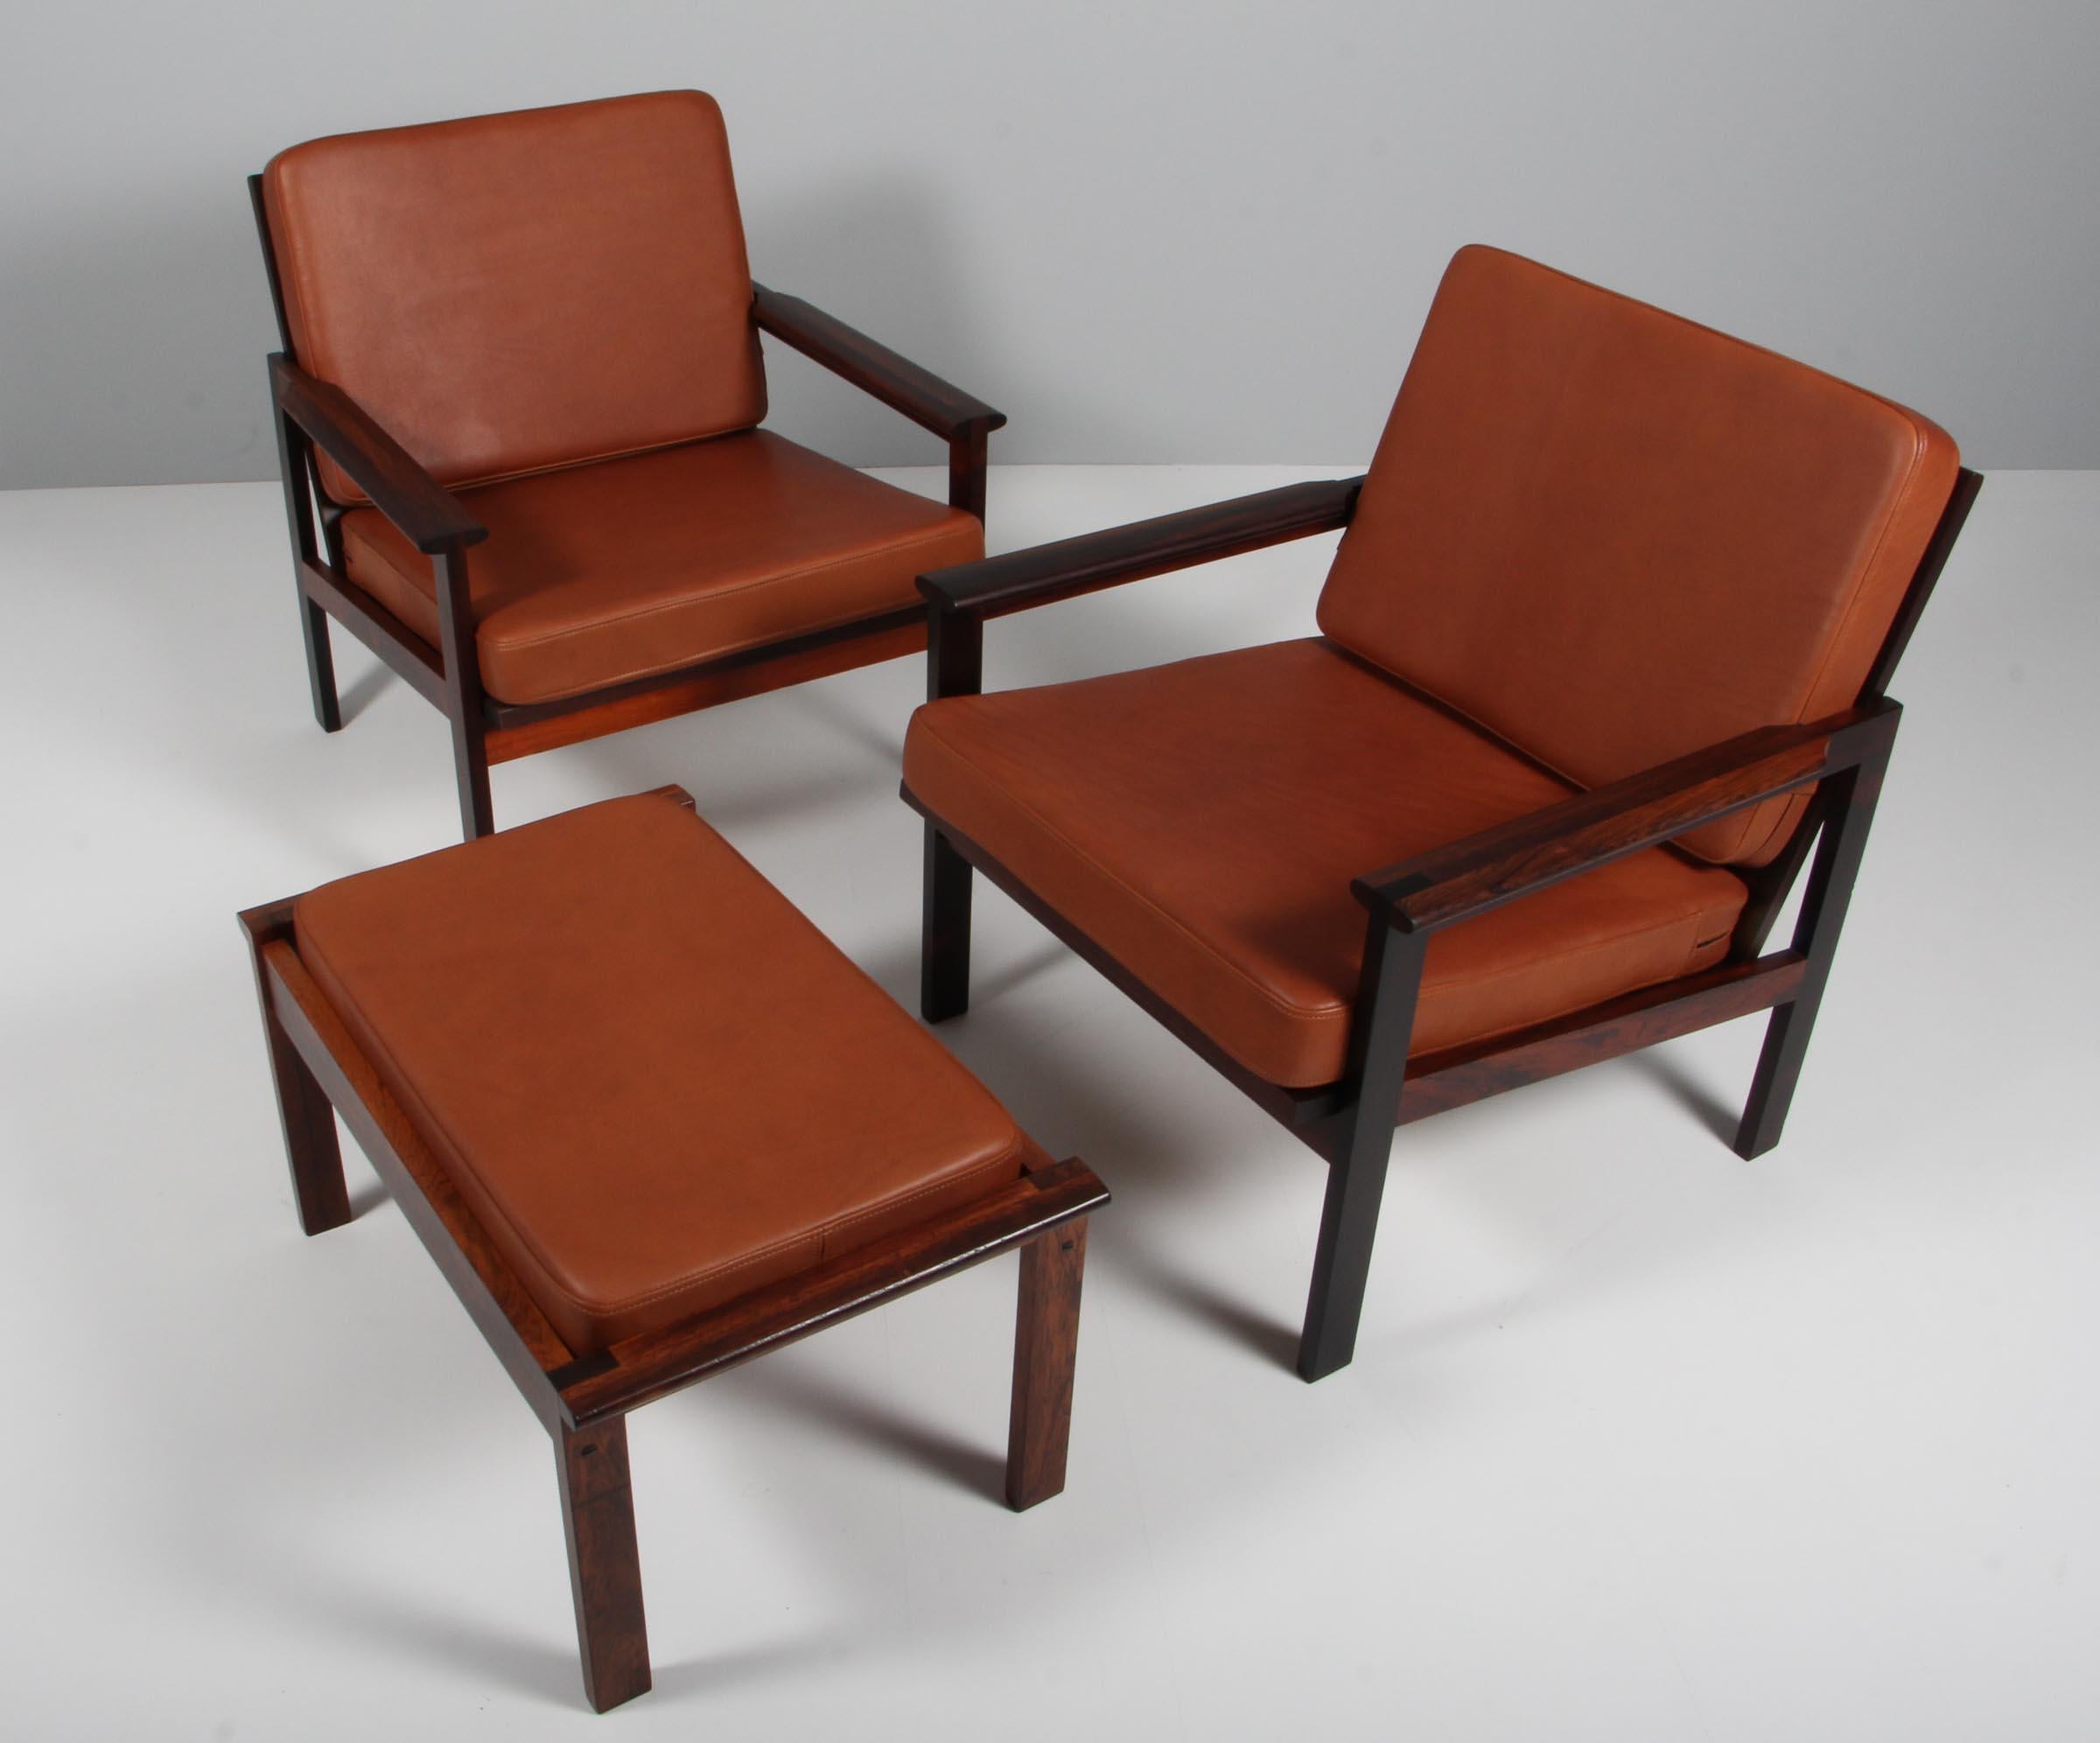 Illum Wikkelso for N. Eilersen Lounge chairs and an ottoman of solid rosewood.

New upholstered with tan aniline leather.

Model Capella, made by N. Eilersen.
 